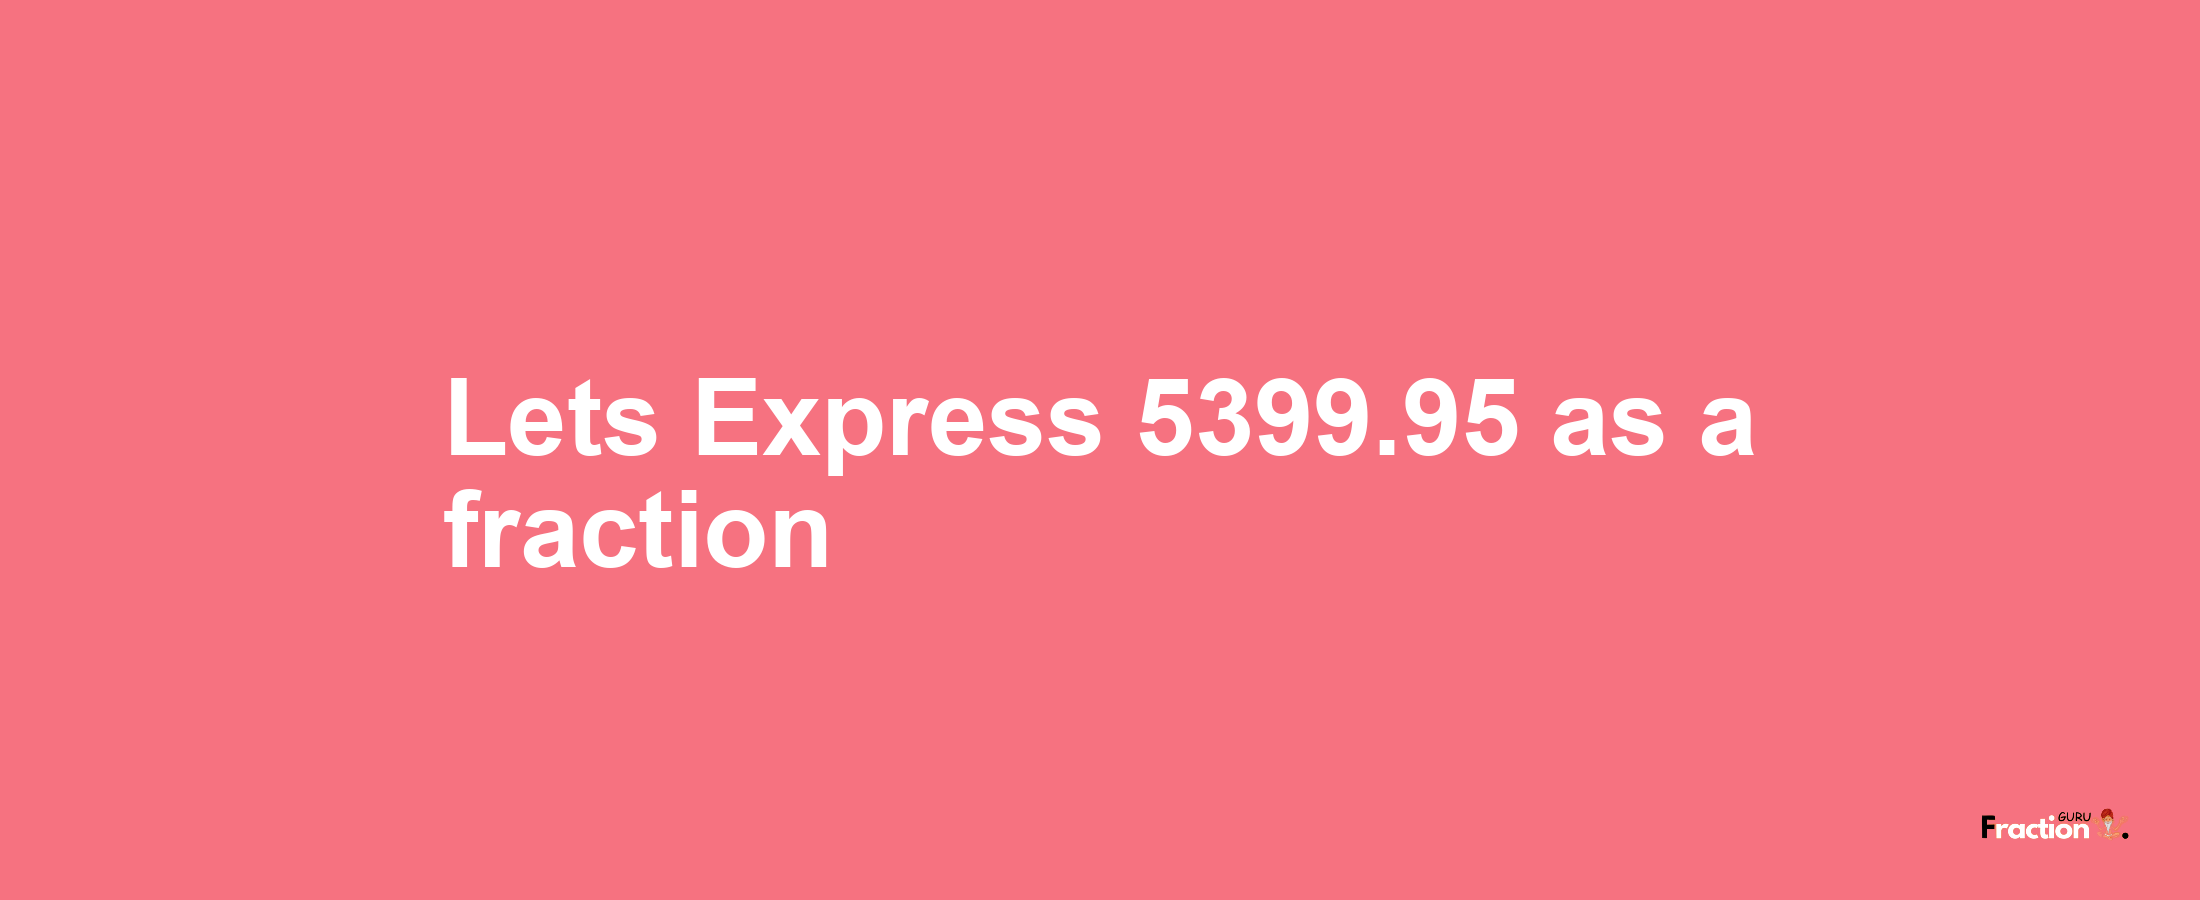 Lets Express 5399.95 as afraction